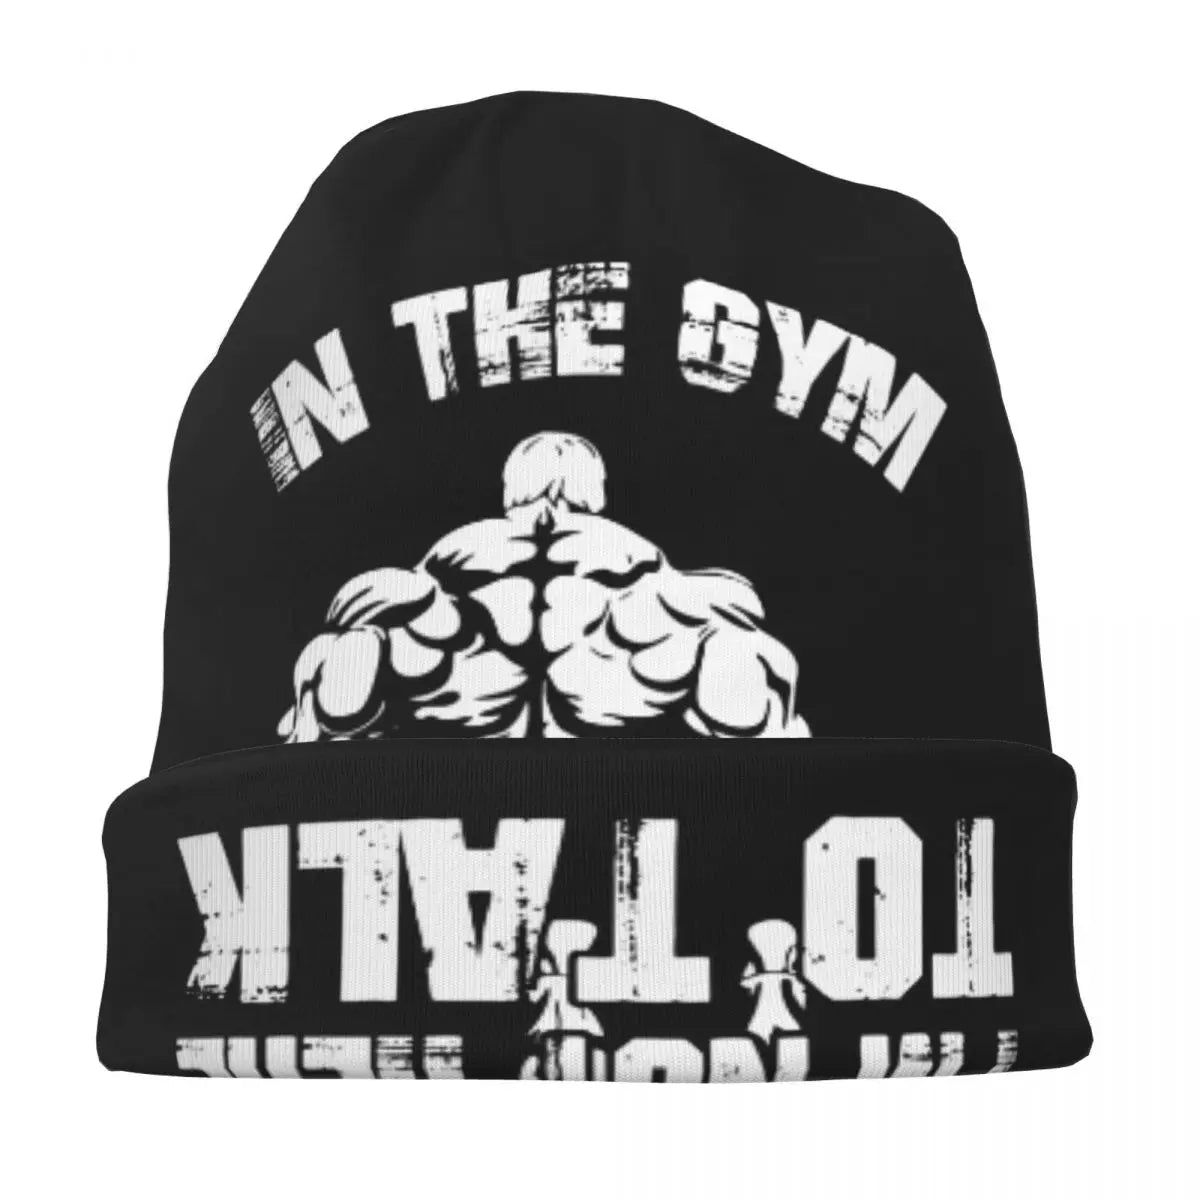 "IN THE GYM I'M NOT HERE TO TALK" Fitness Beanie Hat (Black)